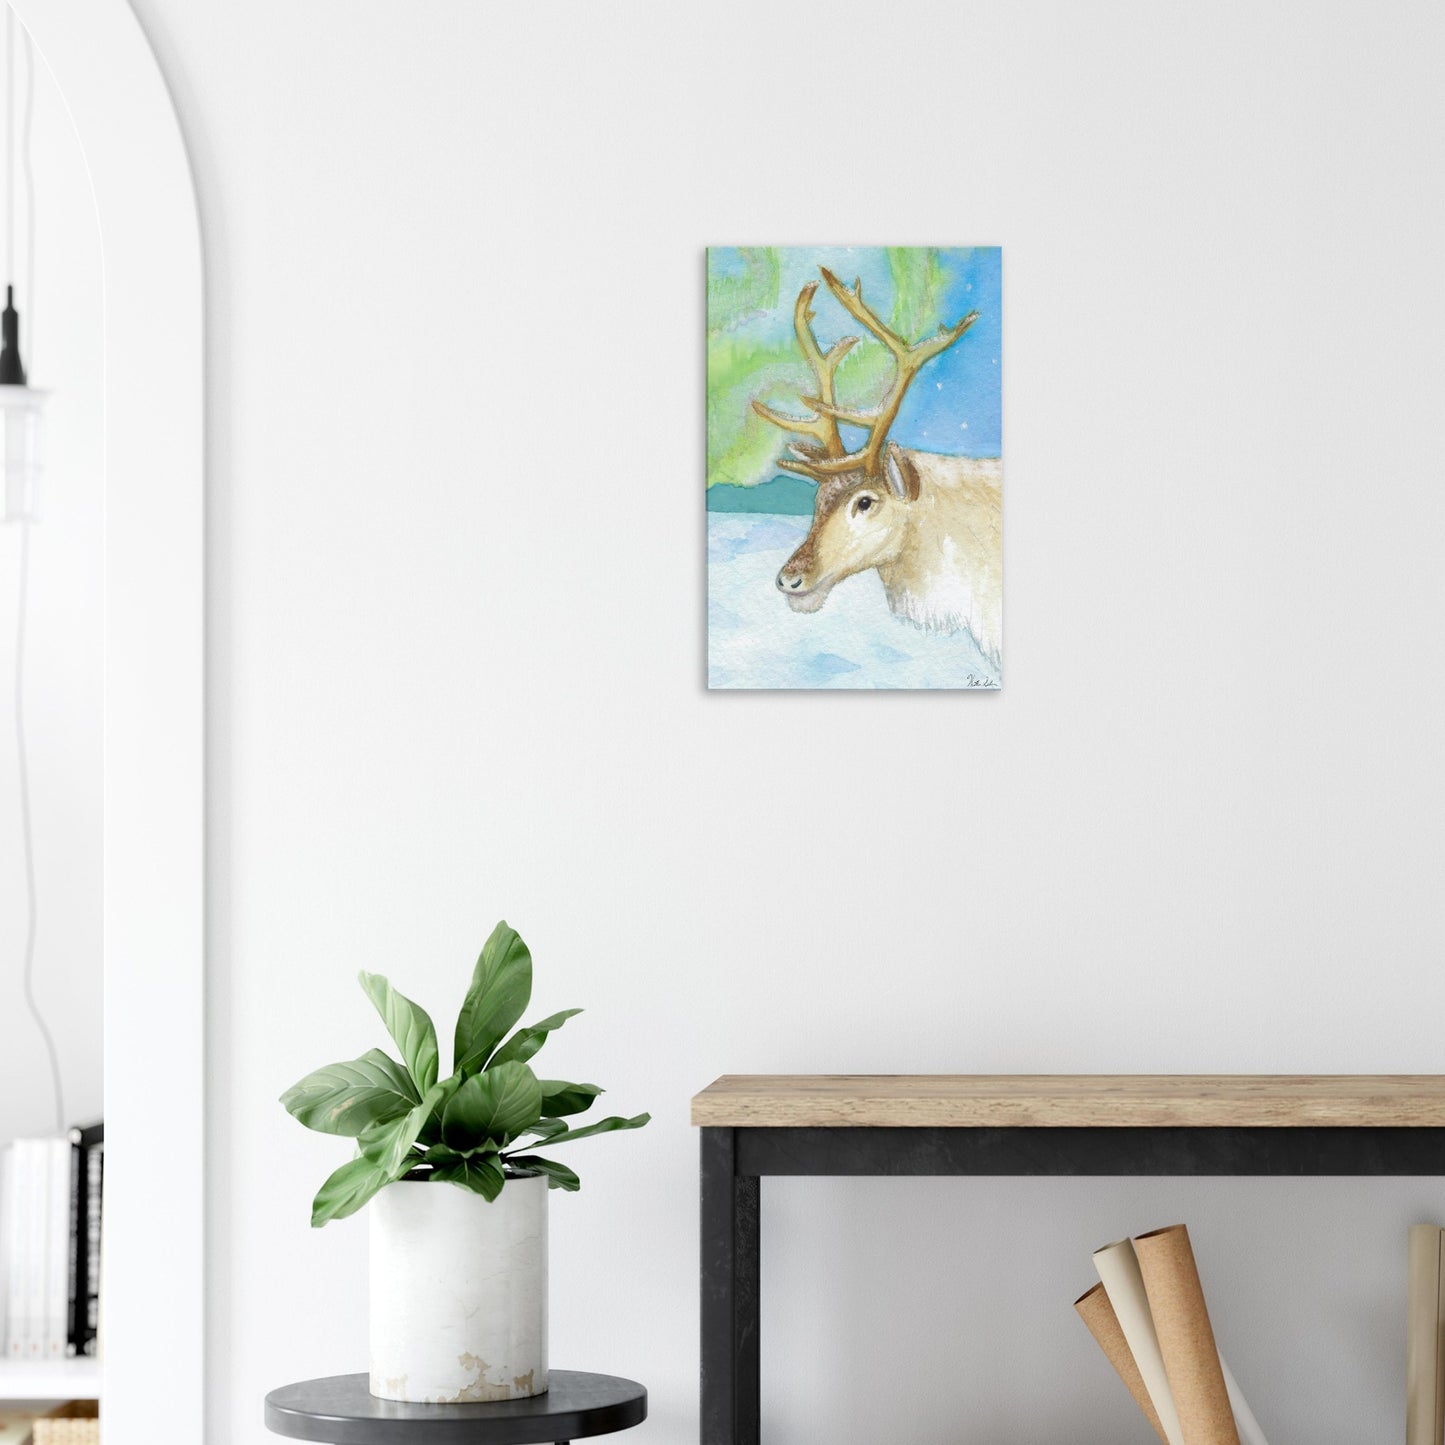 16 by 24 inch slim canvas print of Heather Silver's watercolor painting, northern lights reindeer. Shown on wall above wooden end table and potted plant.